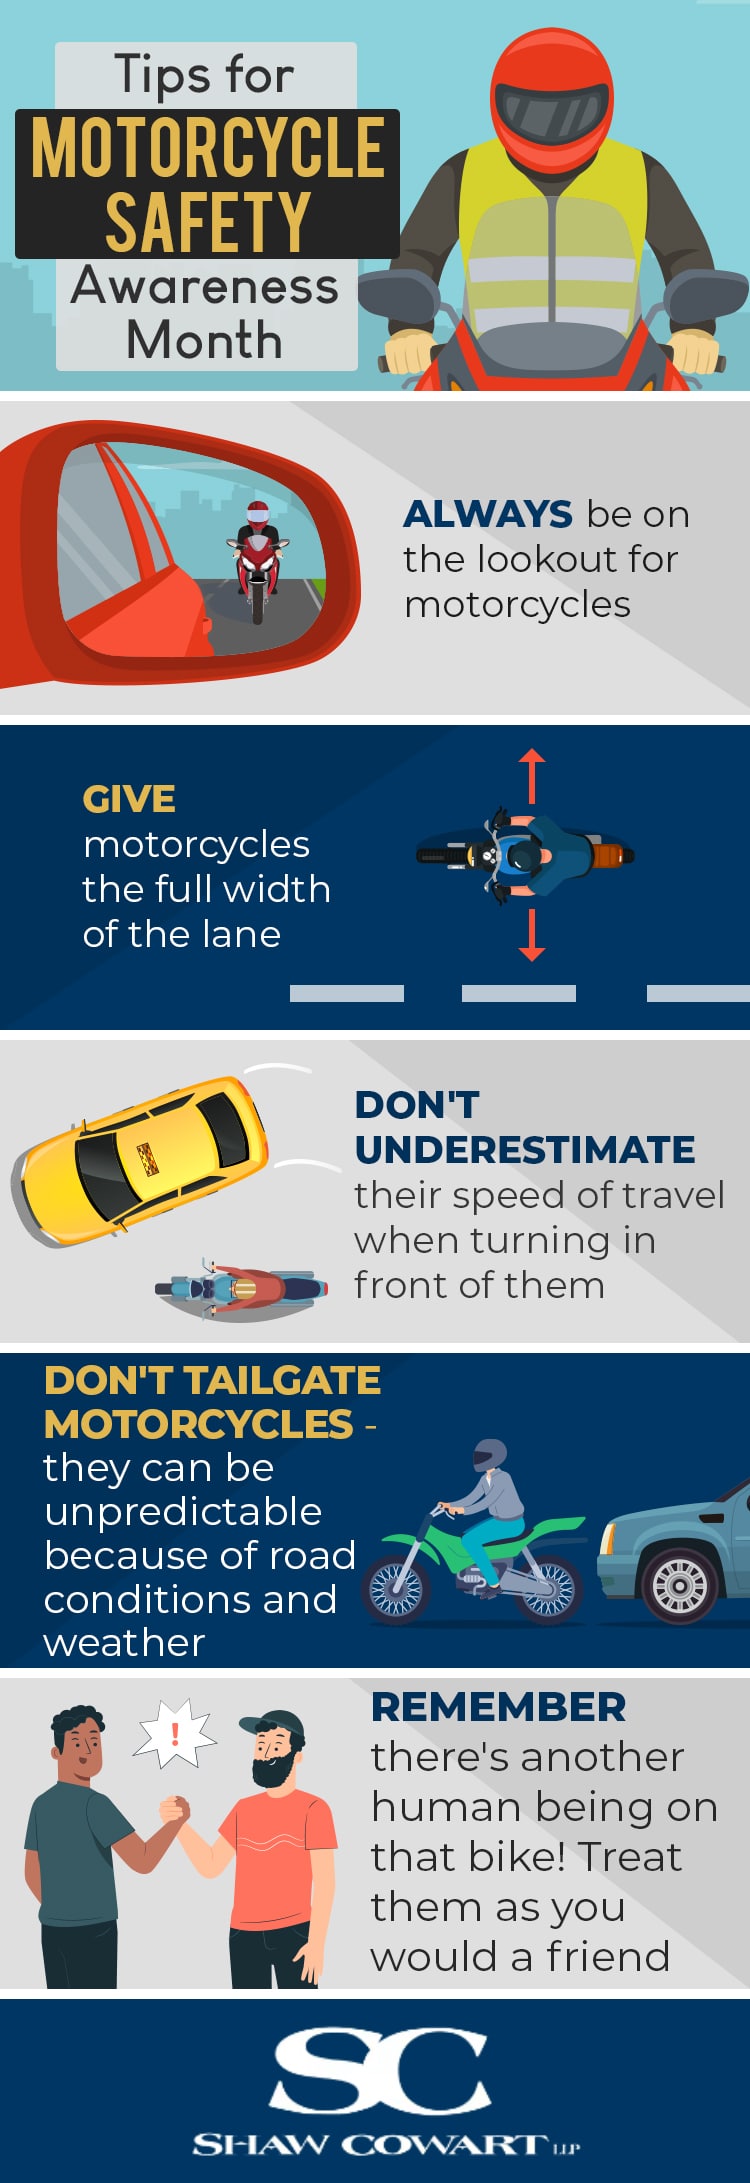 What is Motorcycle Safety Awareness Month?